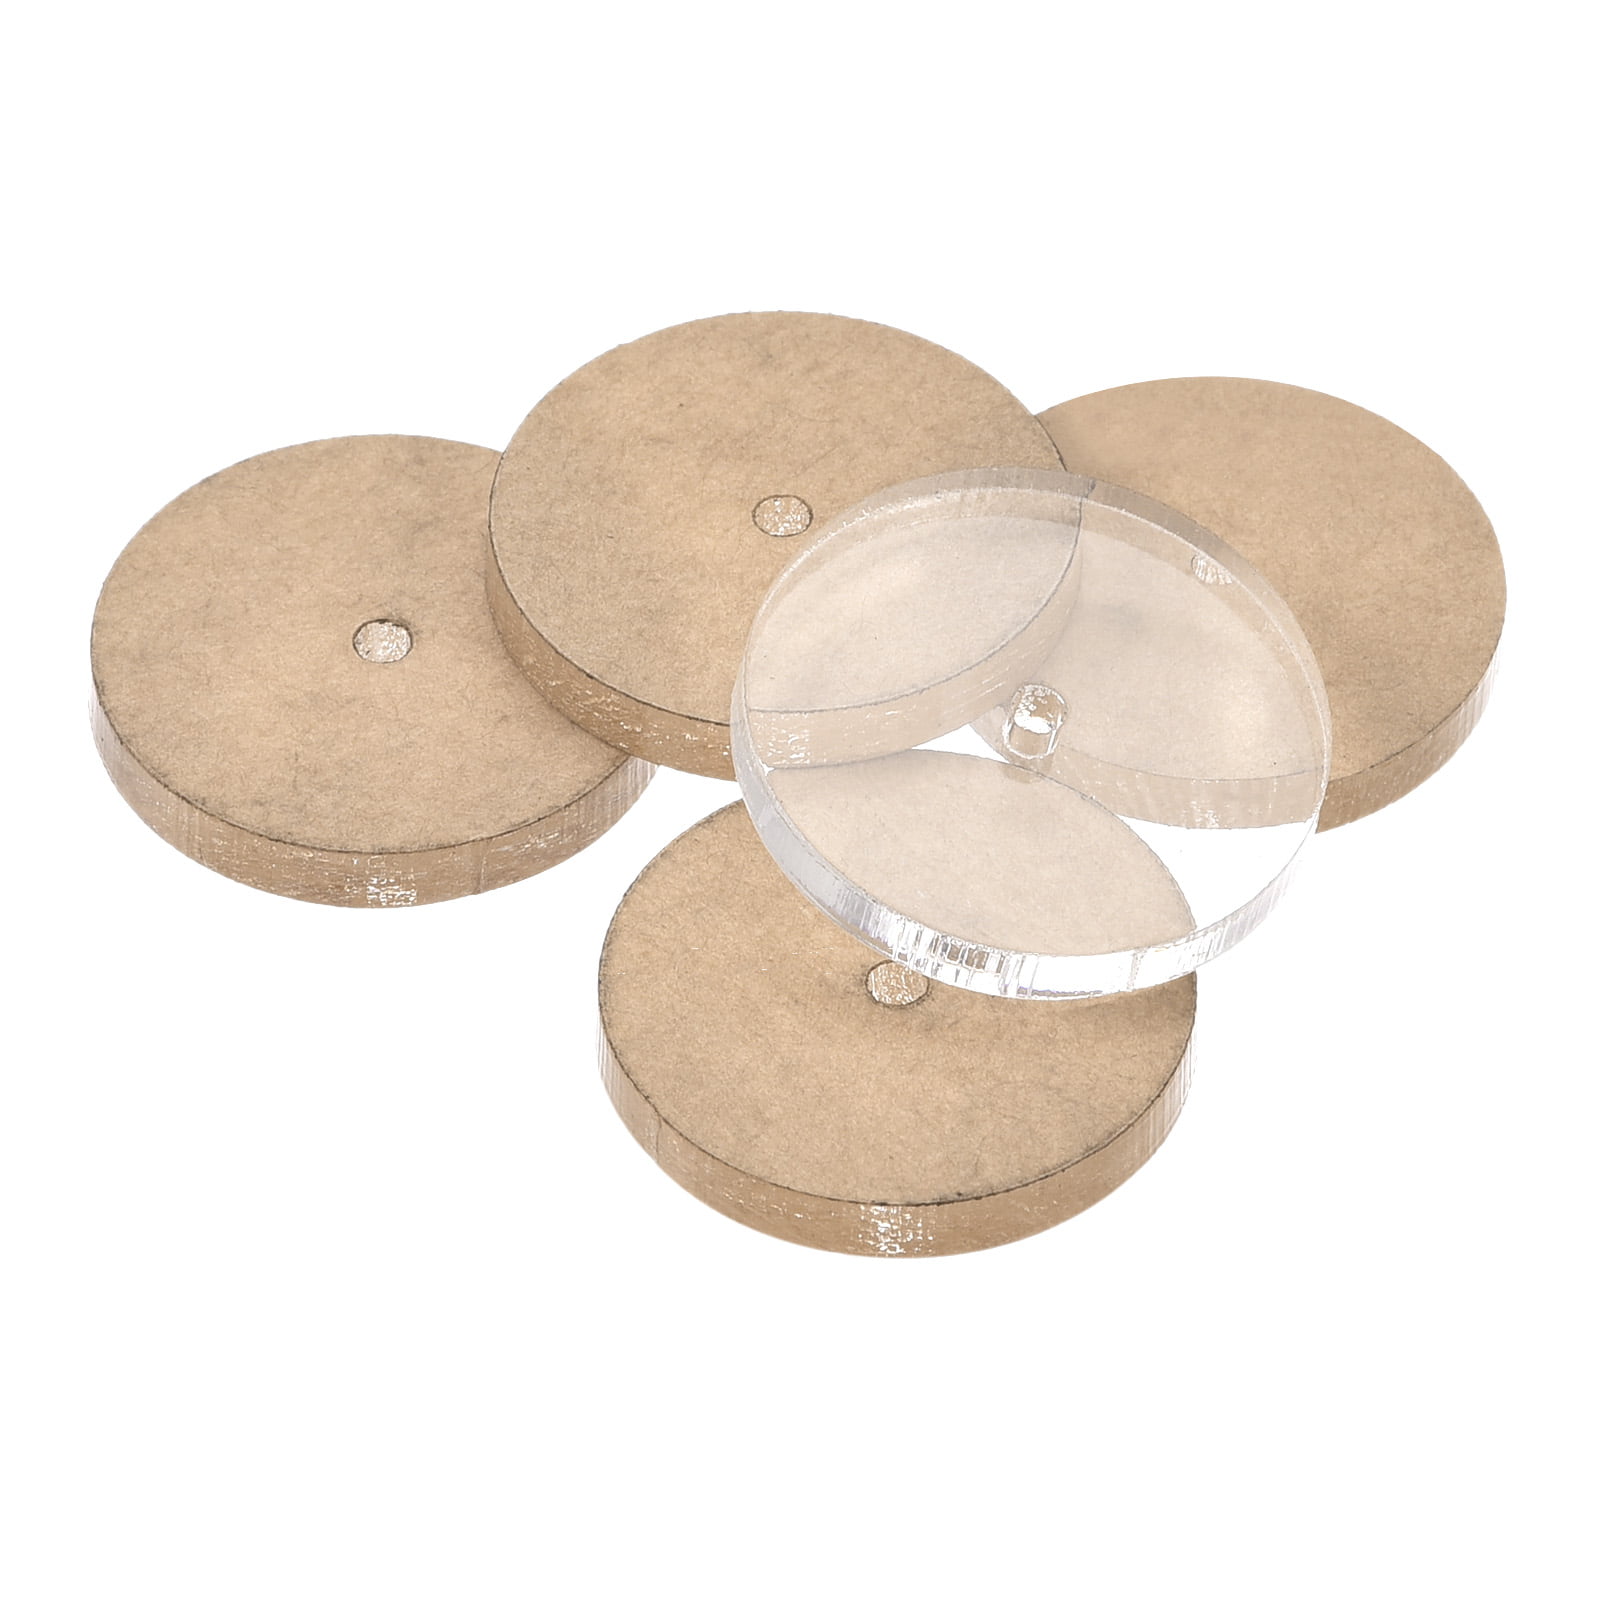 Acrylic Plexiglass Bar Round Bubble PMMA Bar 0.8 inches in Diameter 10 inches in Length Transparent 2 Pieces